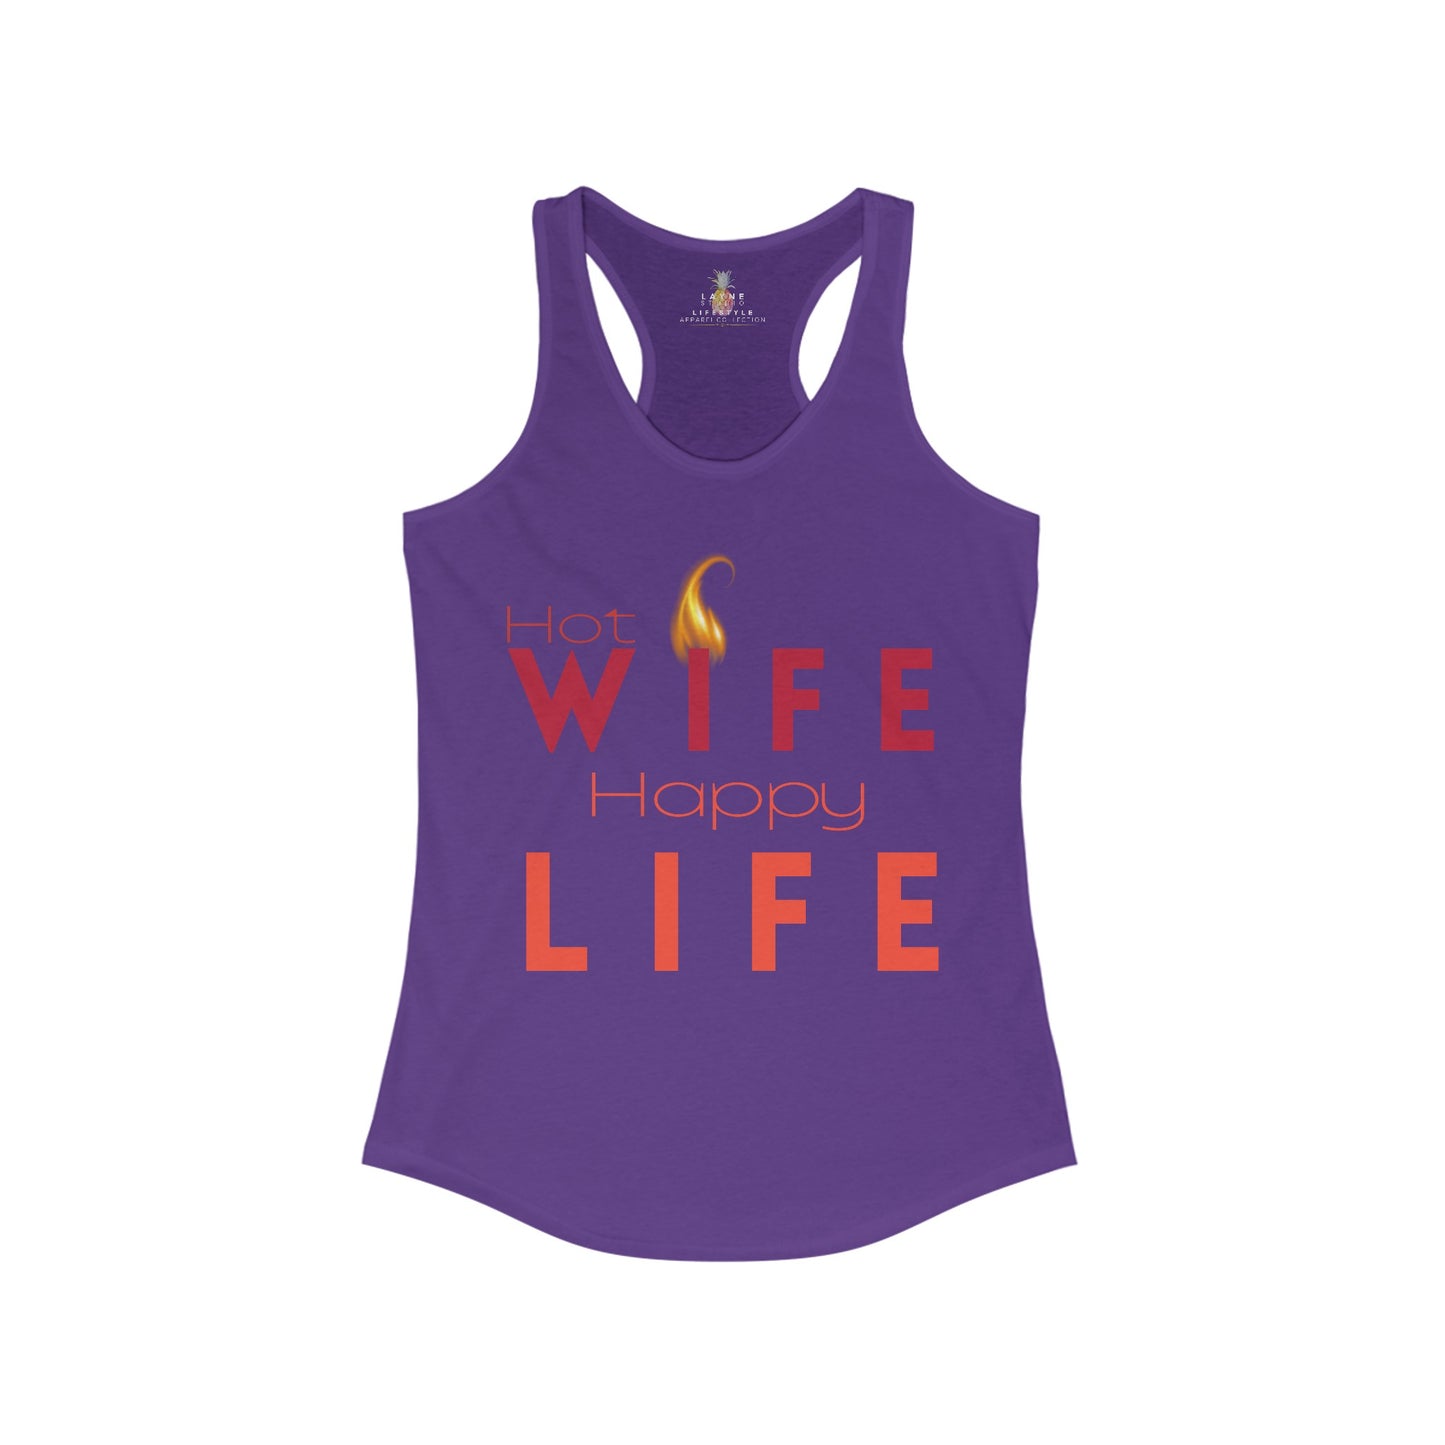 Front View of Layne Studios "Hot Wife Happy Life" Graphic Solid Purple Rush Racerback Tank-Top